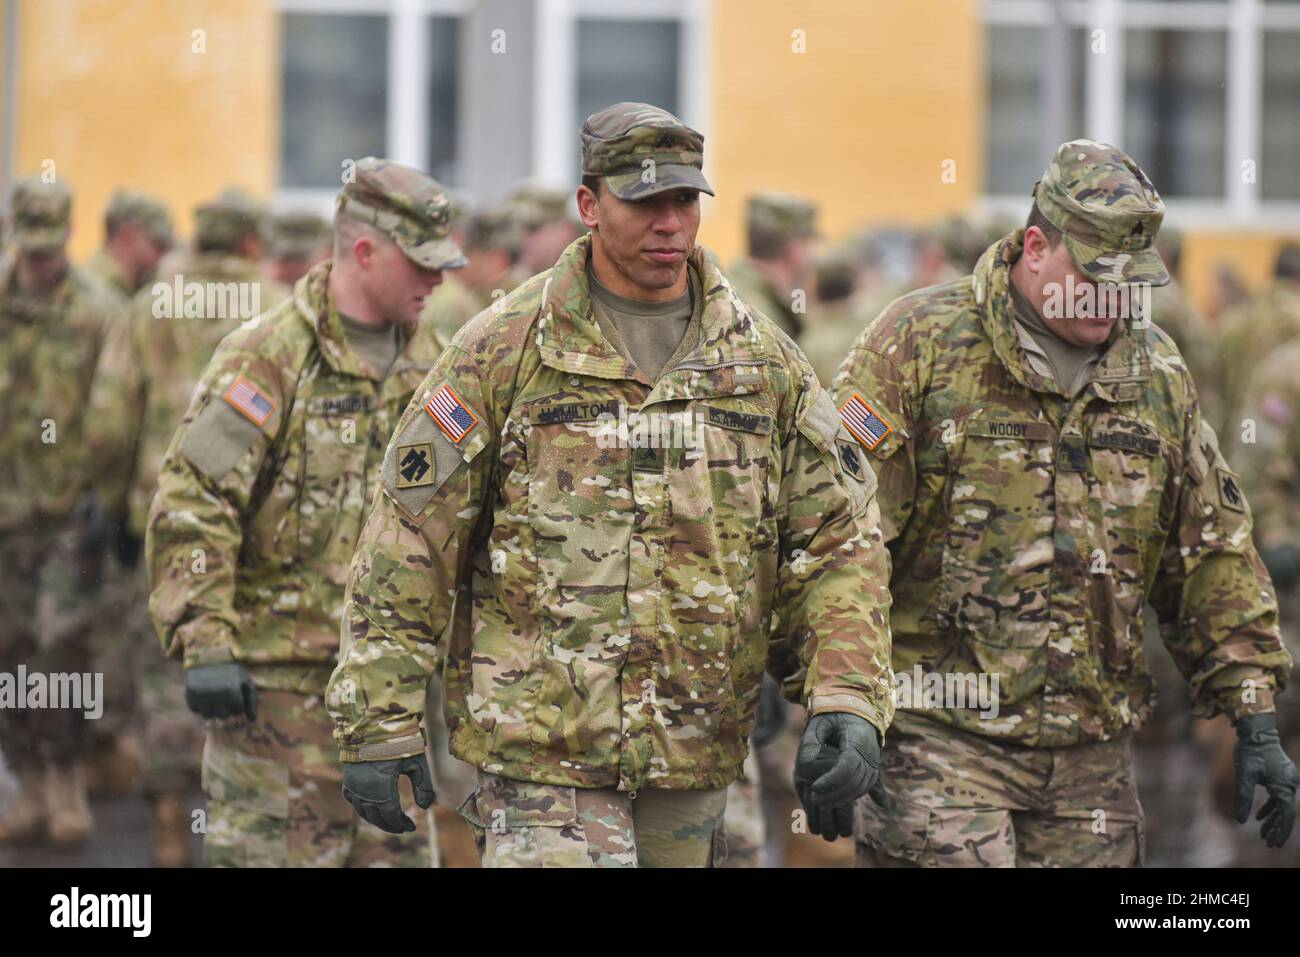 USA instructors seen during the opening ceremony of the next stage of training of the Armed Forces units under the program 'Joint Multinational Training Group - Ukraine' (JMTG-U). Stock Photo